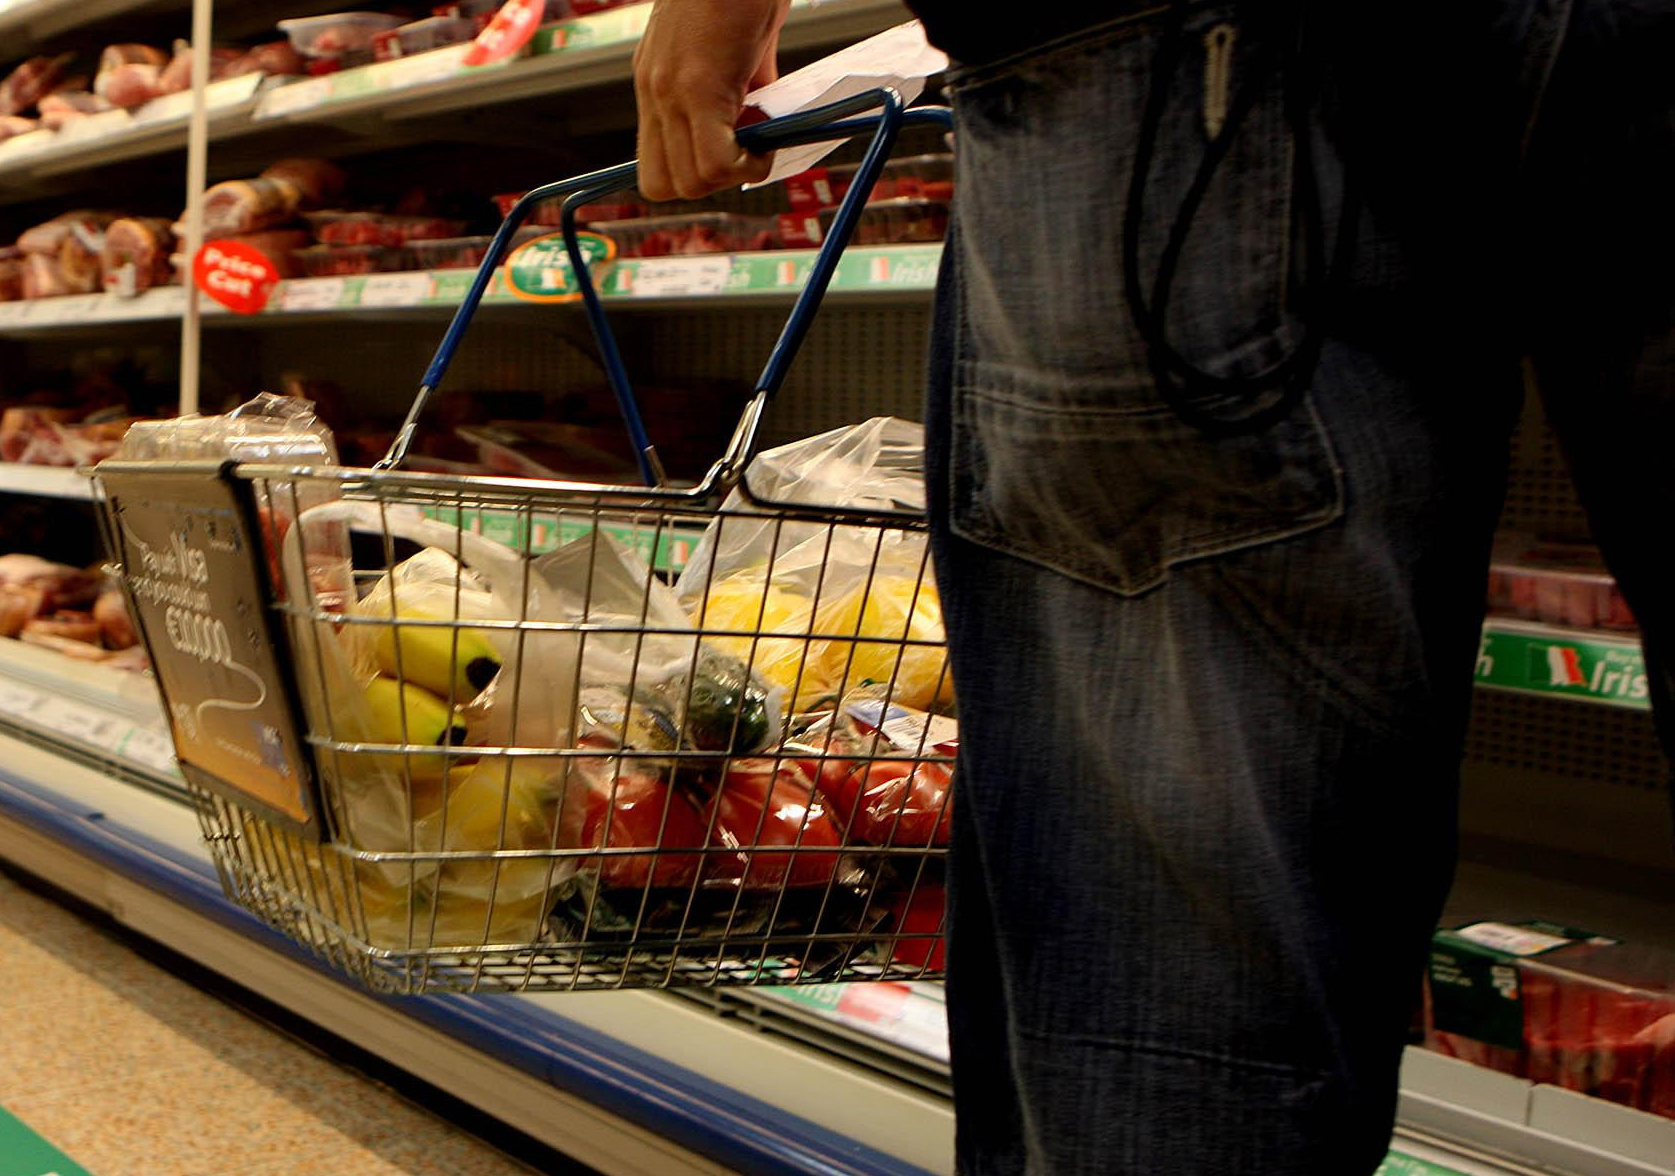 Issue of the day: The cost-of-living is changing shopping habits worldwide